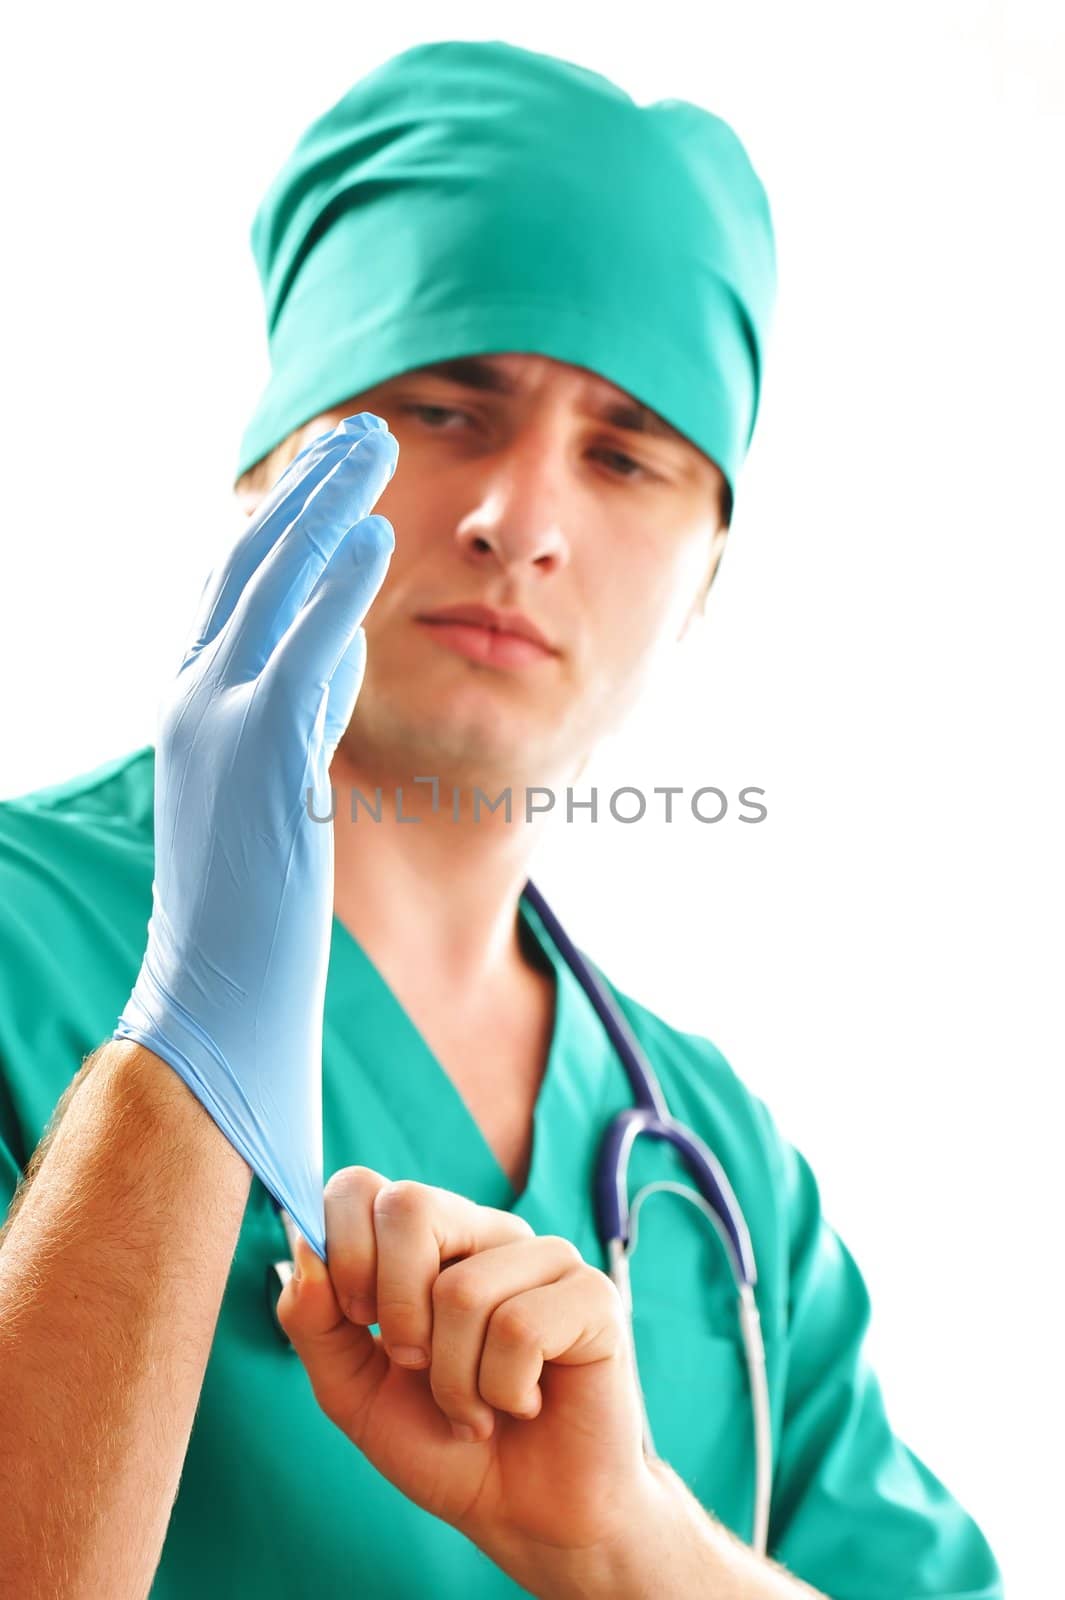 Pulling on surgical glove by haveseen